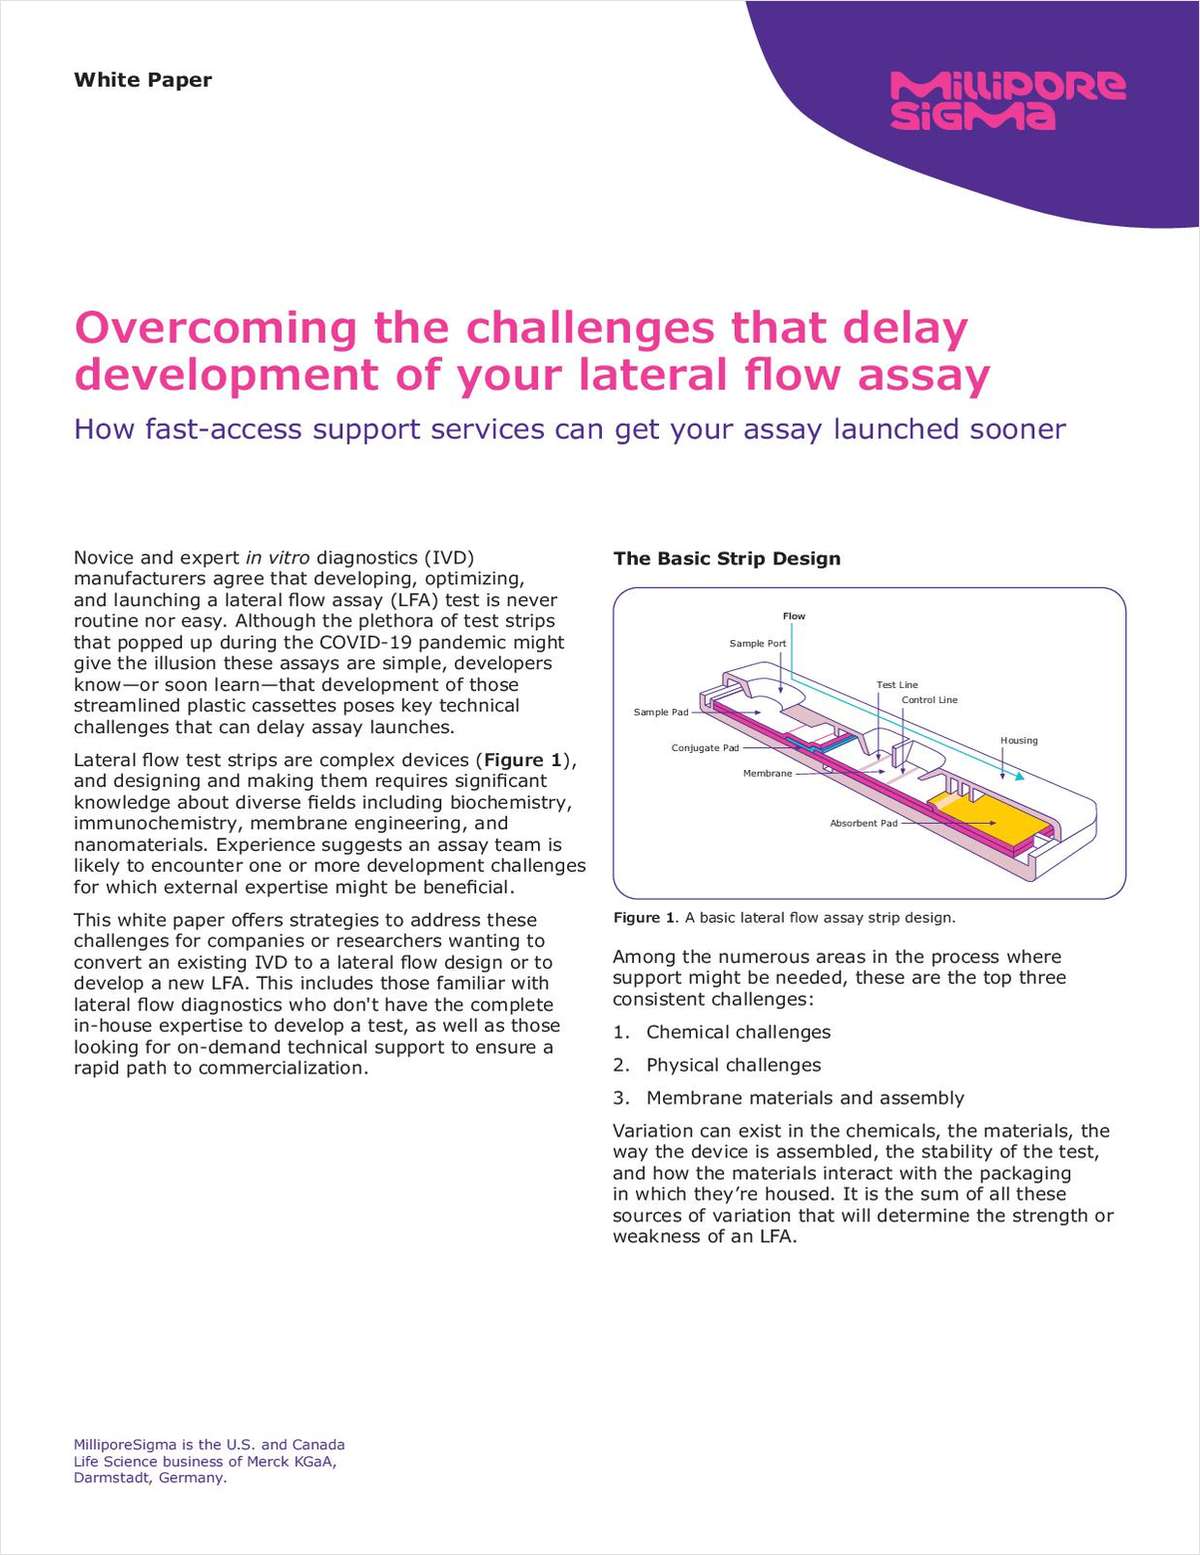 Overcoming the Challenges That Delay Development of Your Lateral Flow Assay